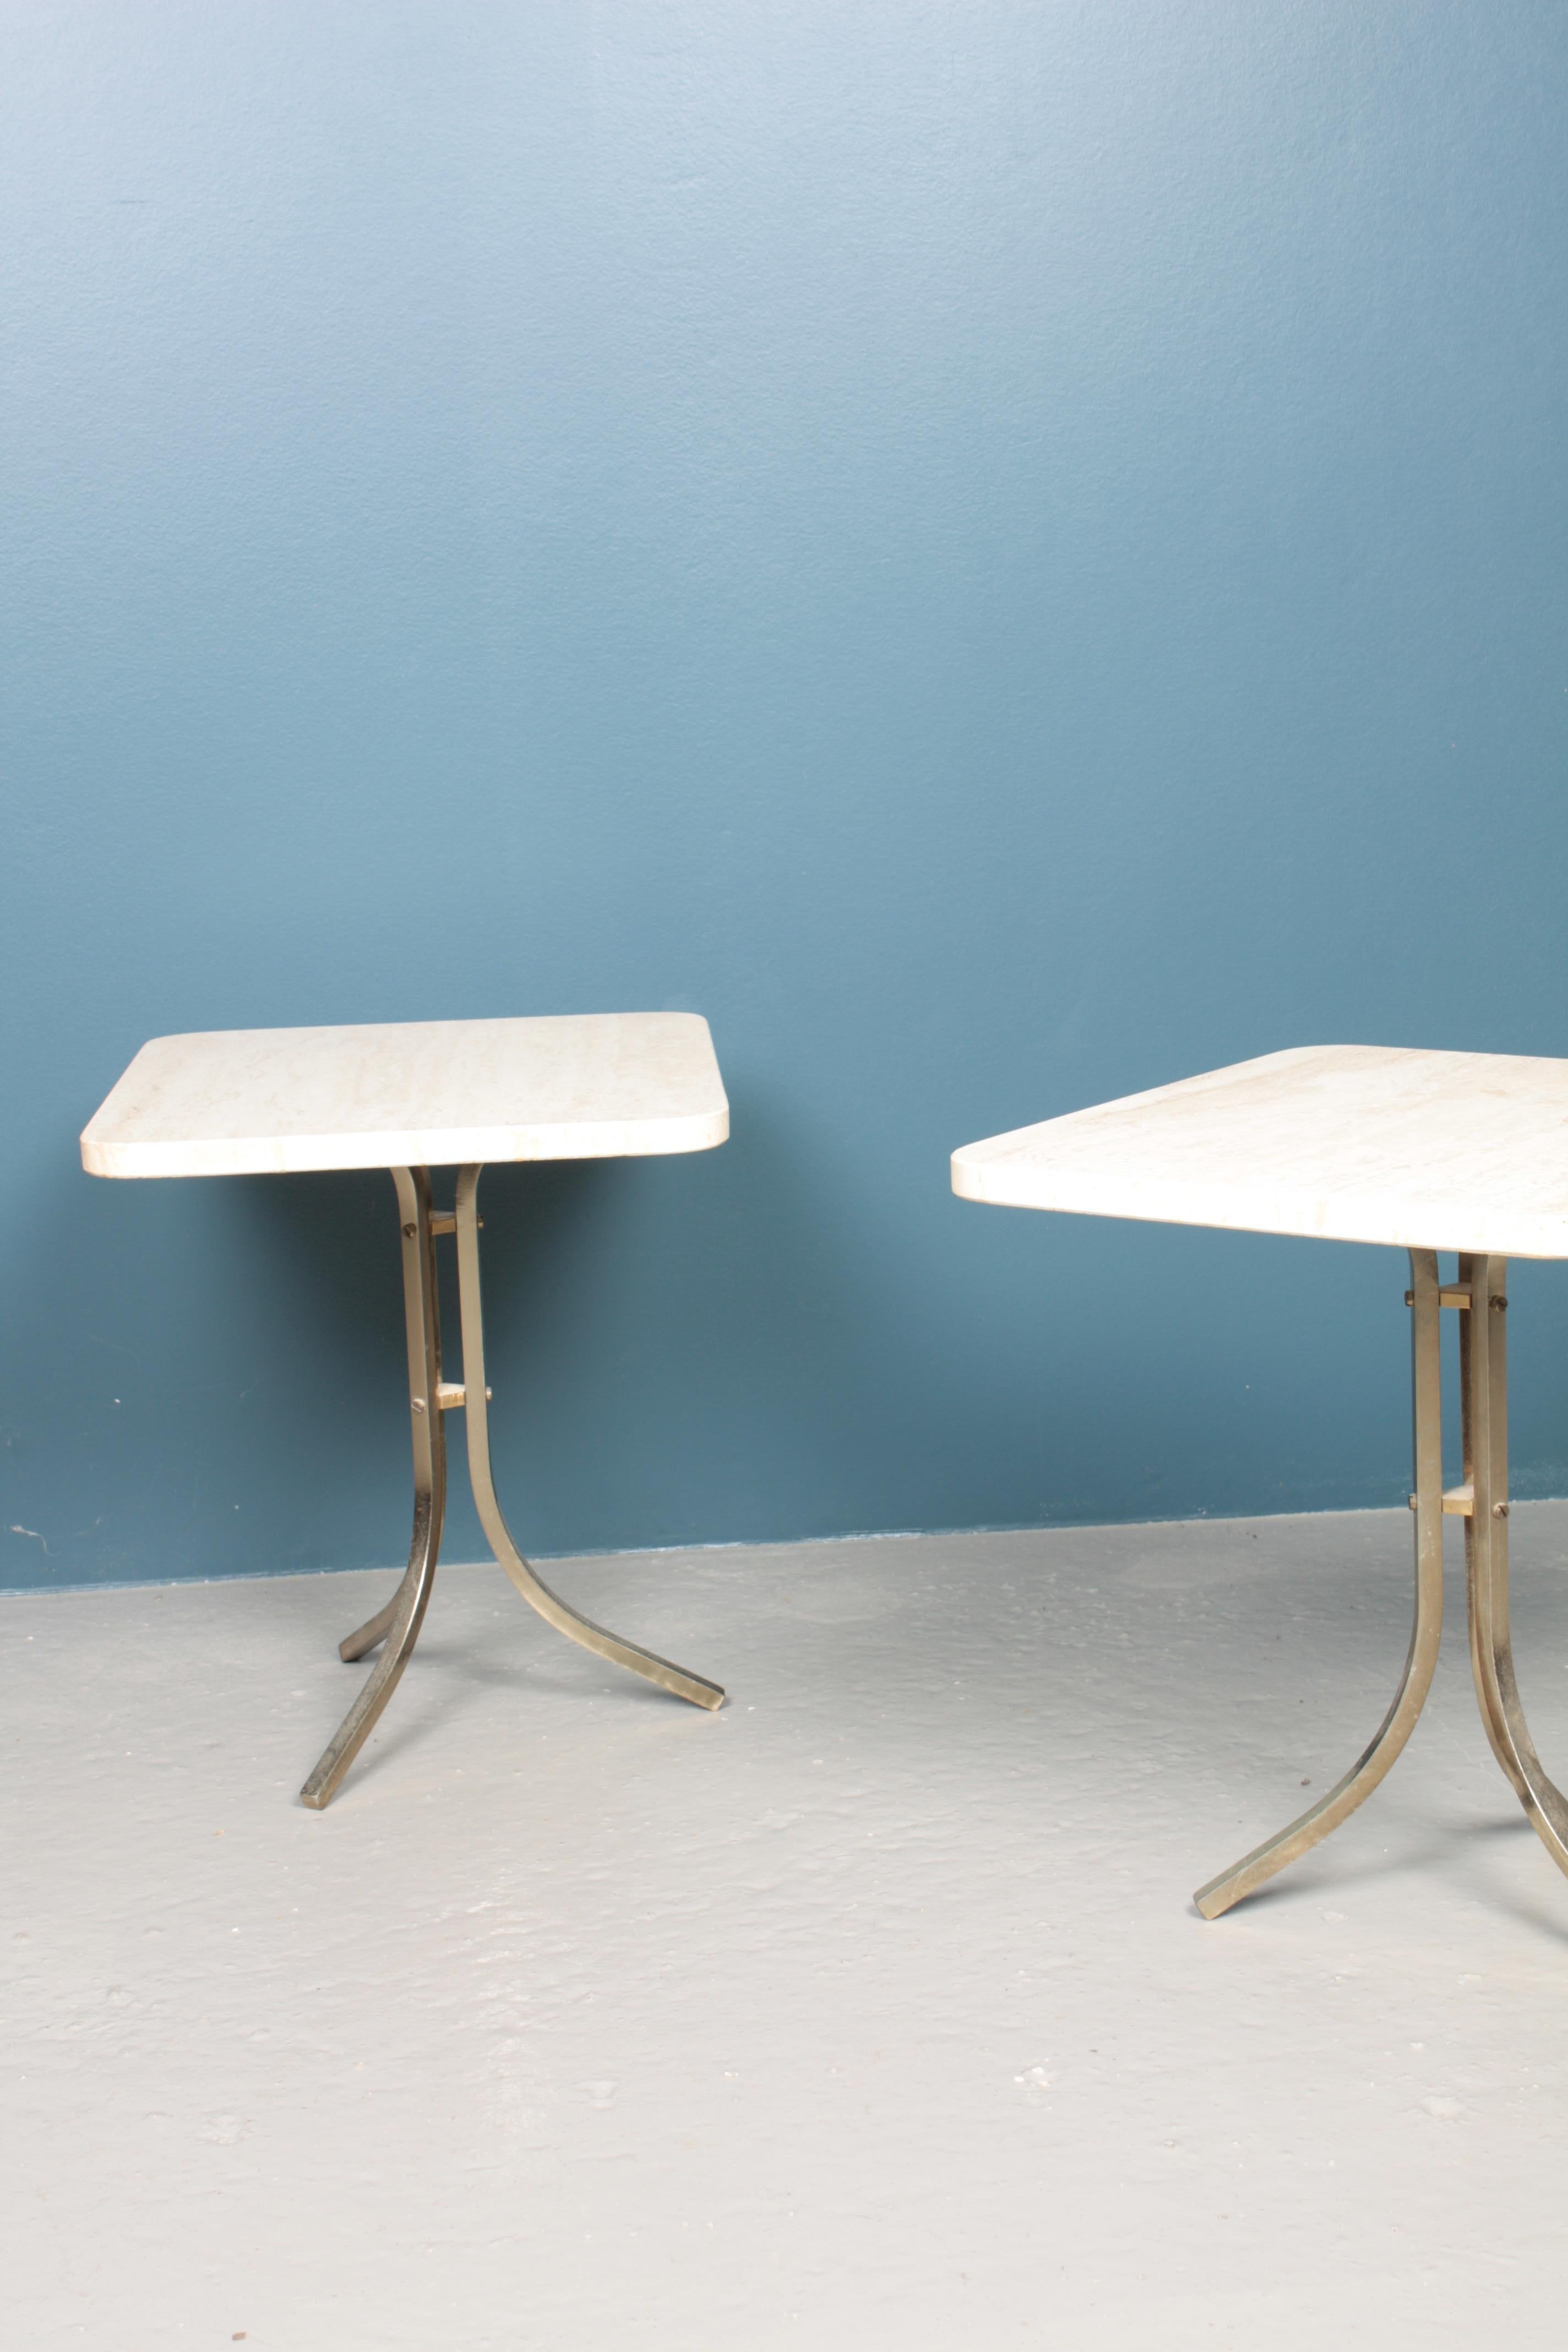 Danish Pair of Midcentury Side Tables in Brass and Travertine, 1960s For Sale